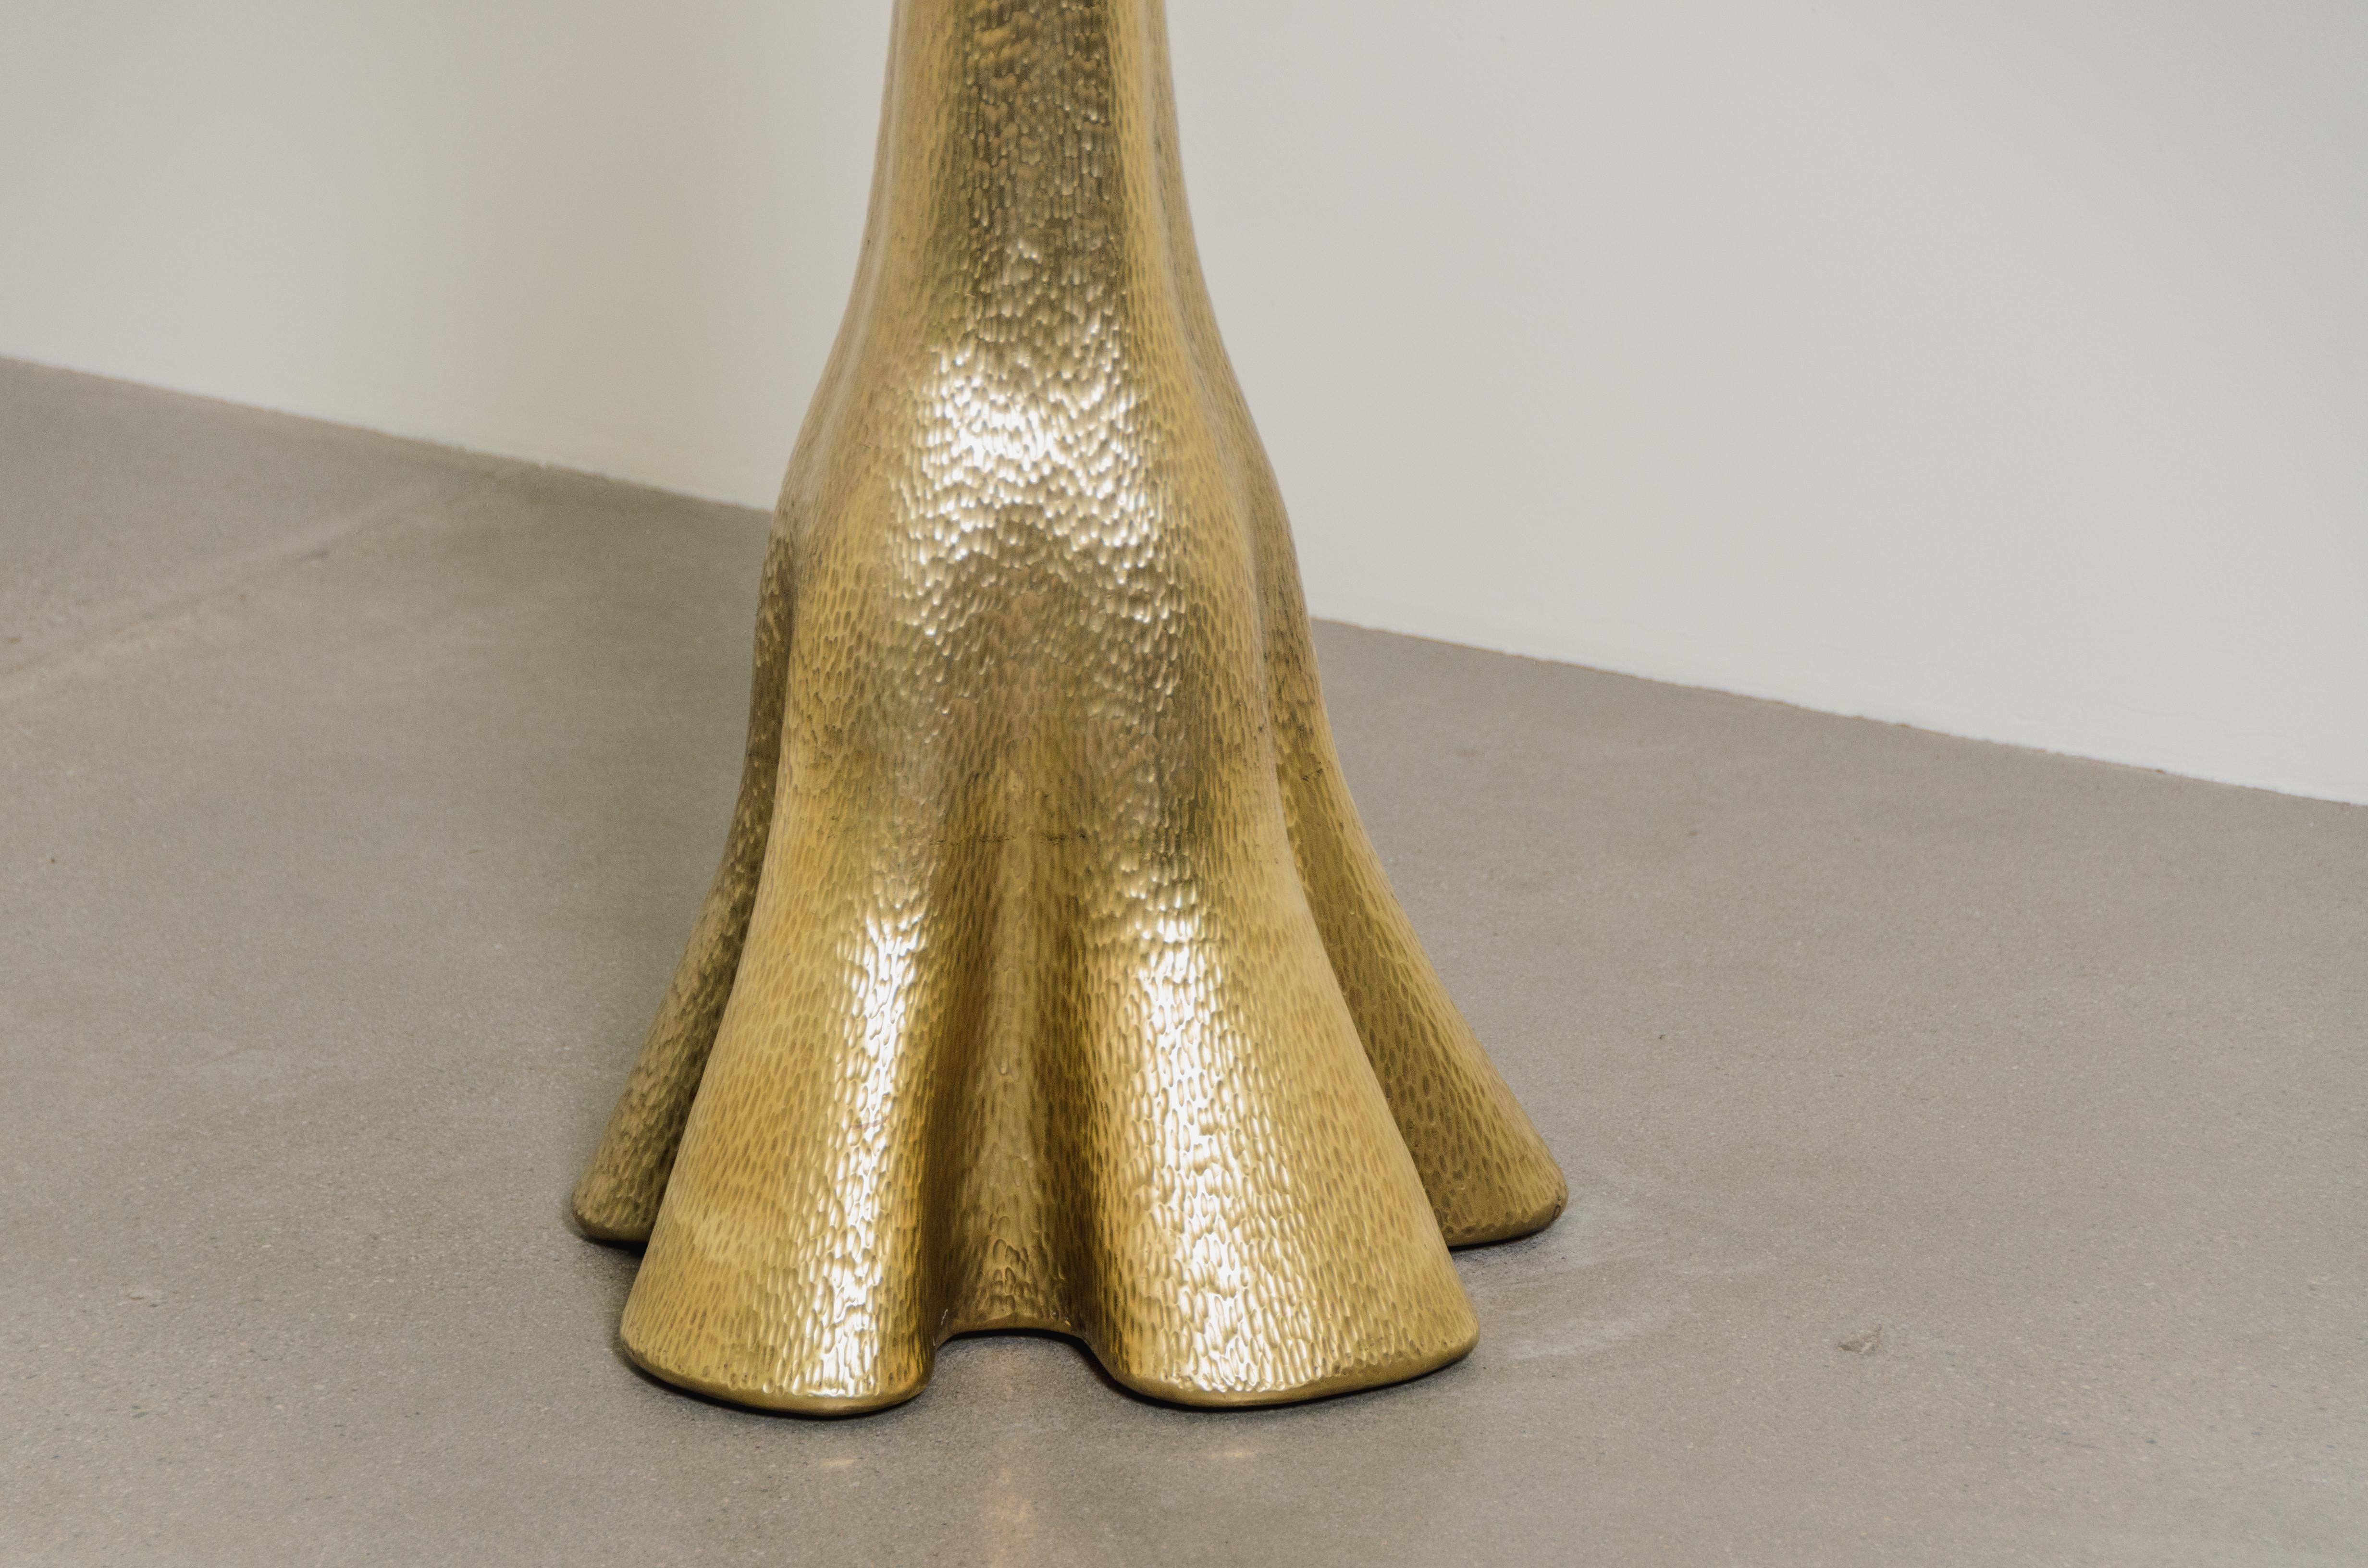 Modern Contemporary Repoussé Ji Guan Torchiere in Brass by Robert Kuo, Limited Edition For Sale